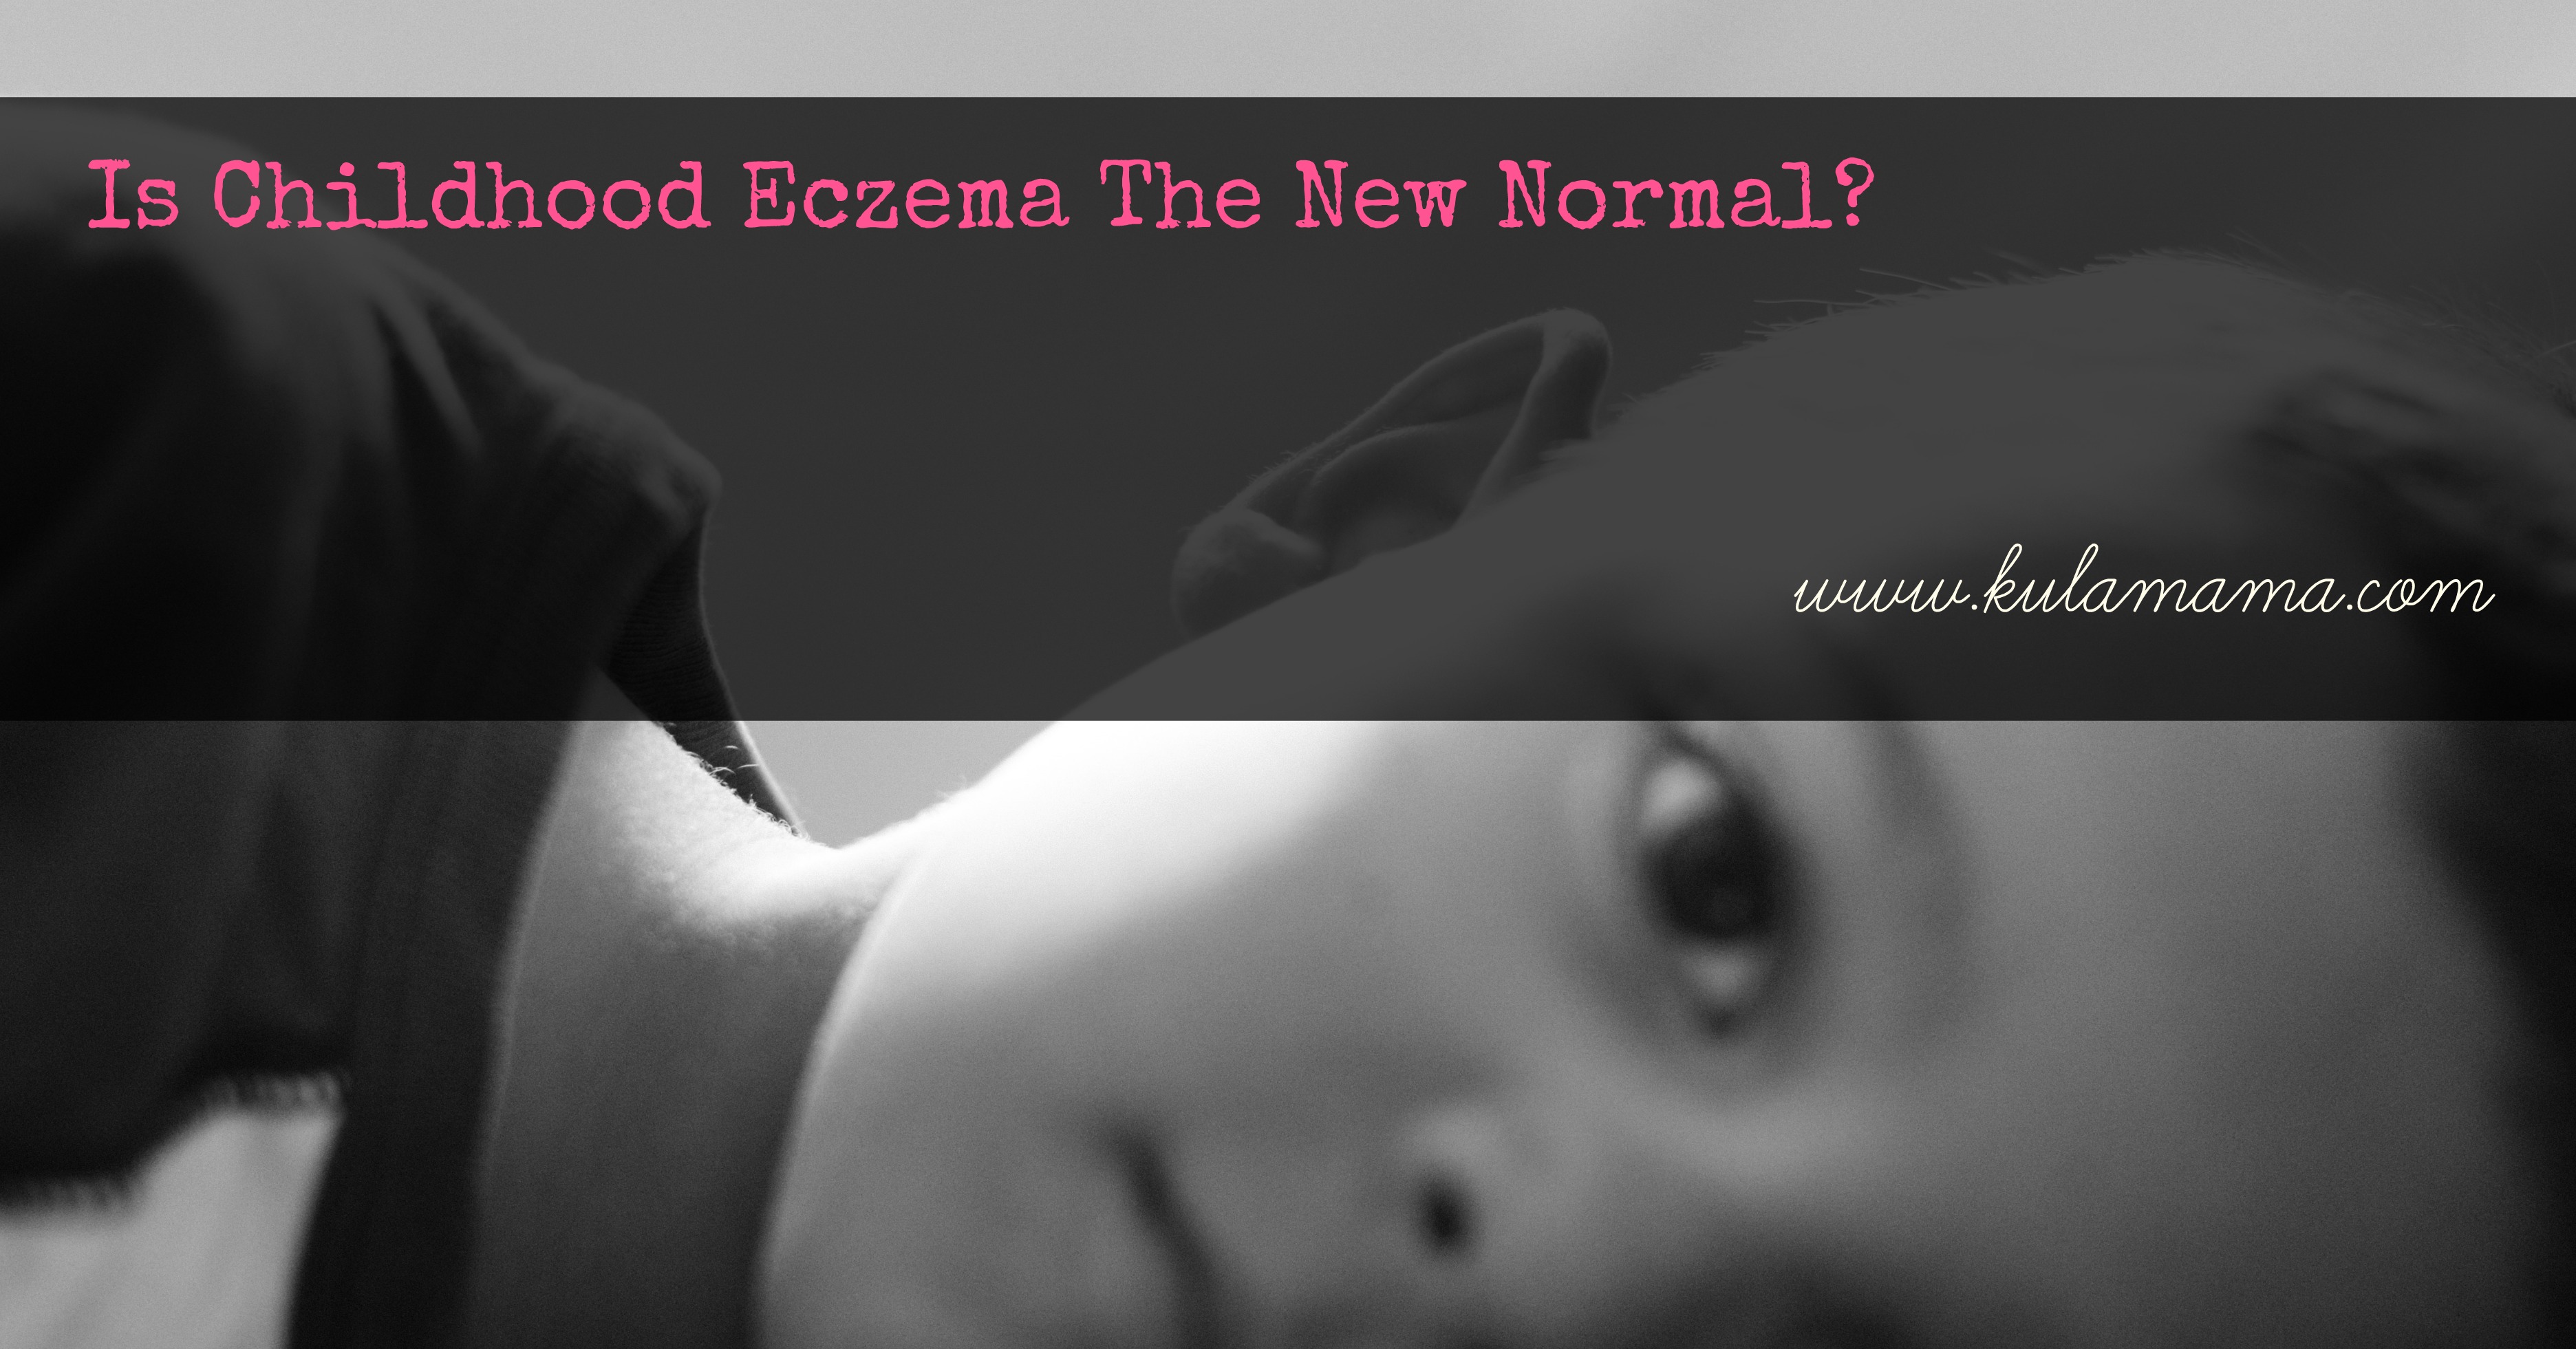 Is Childhood Eczema The New Normal?